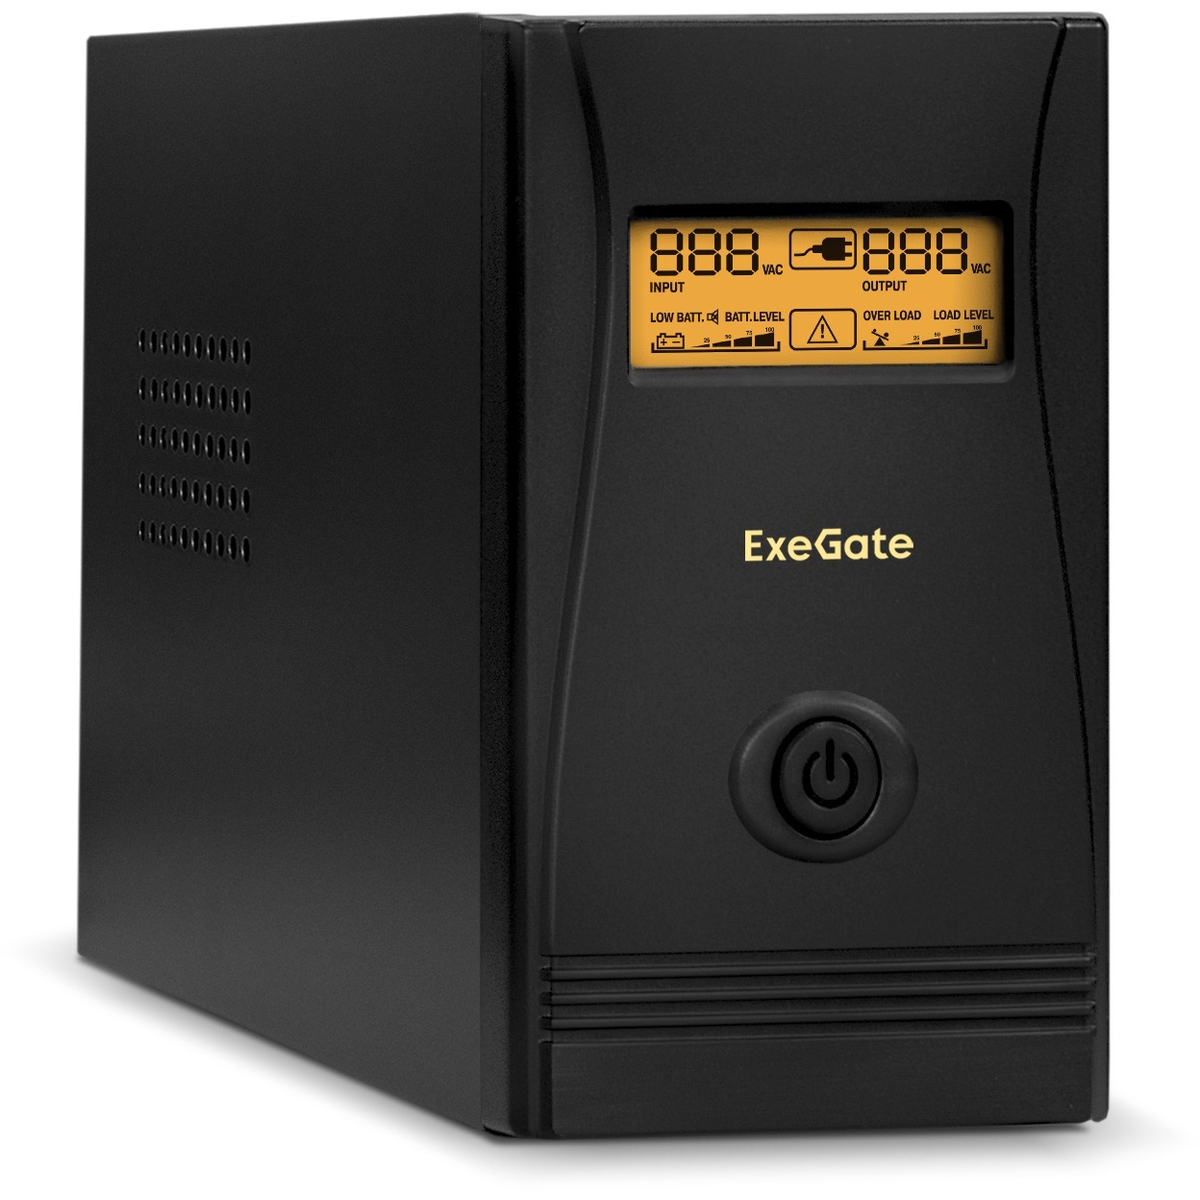  ExeGate SpecialPro Smart LLB-500.LCD.AVR.4C13